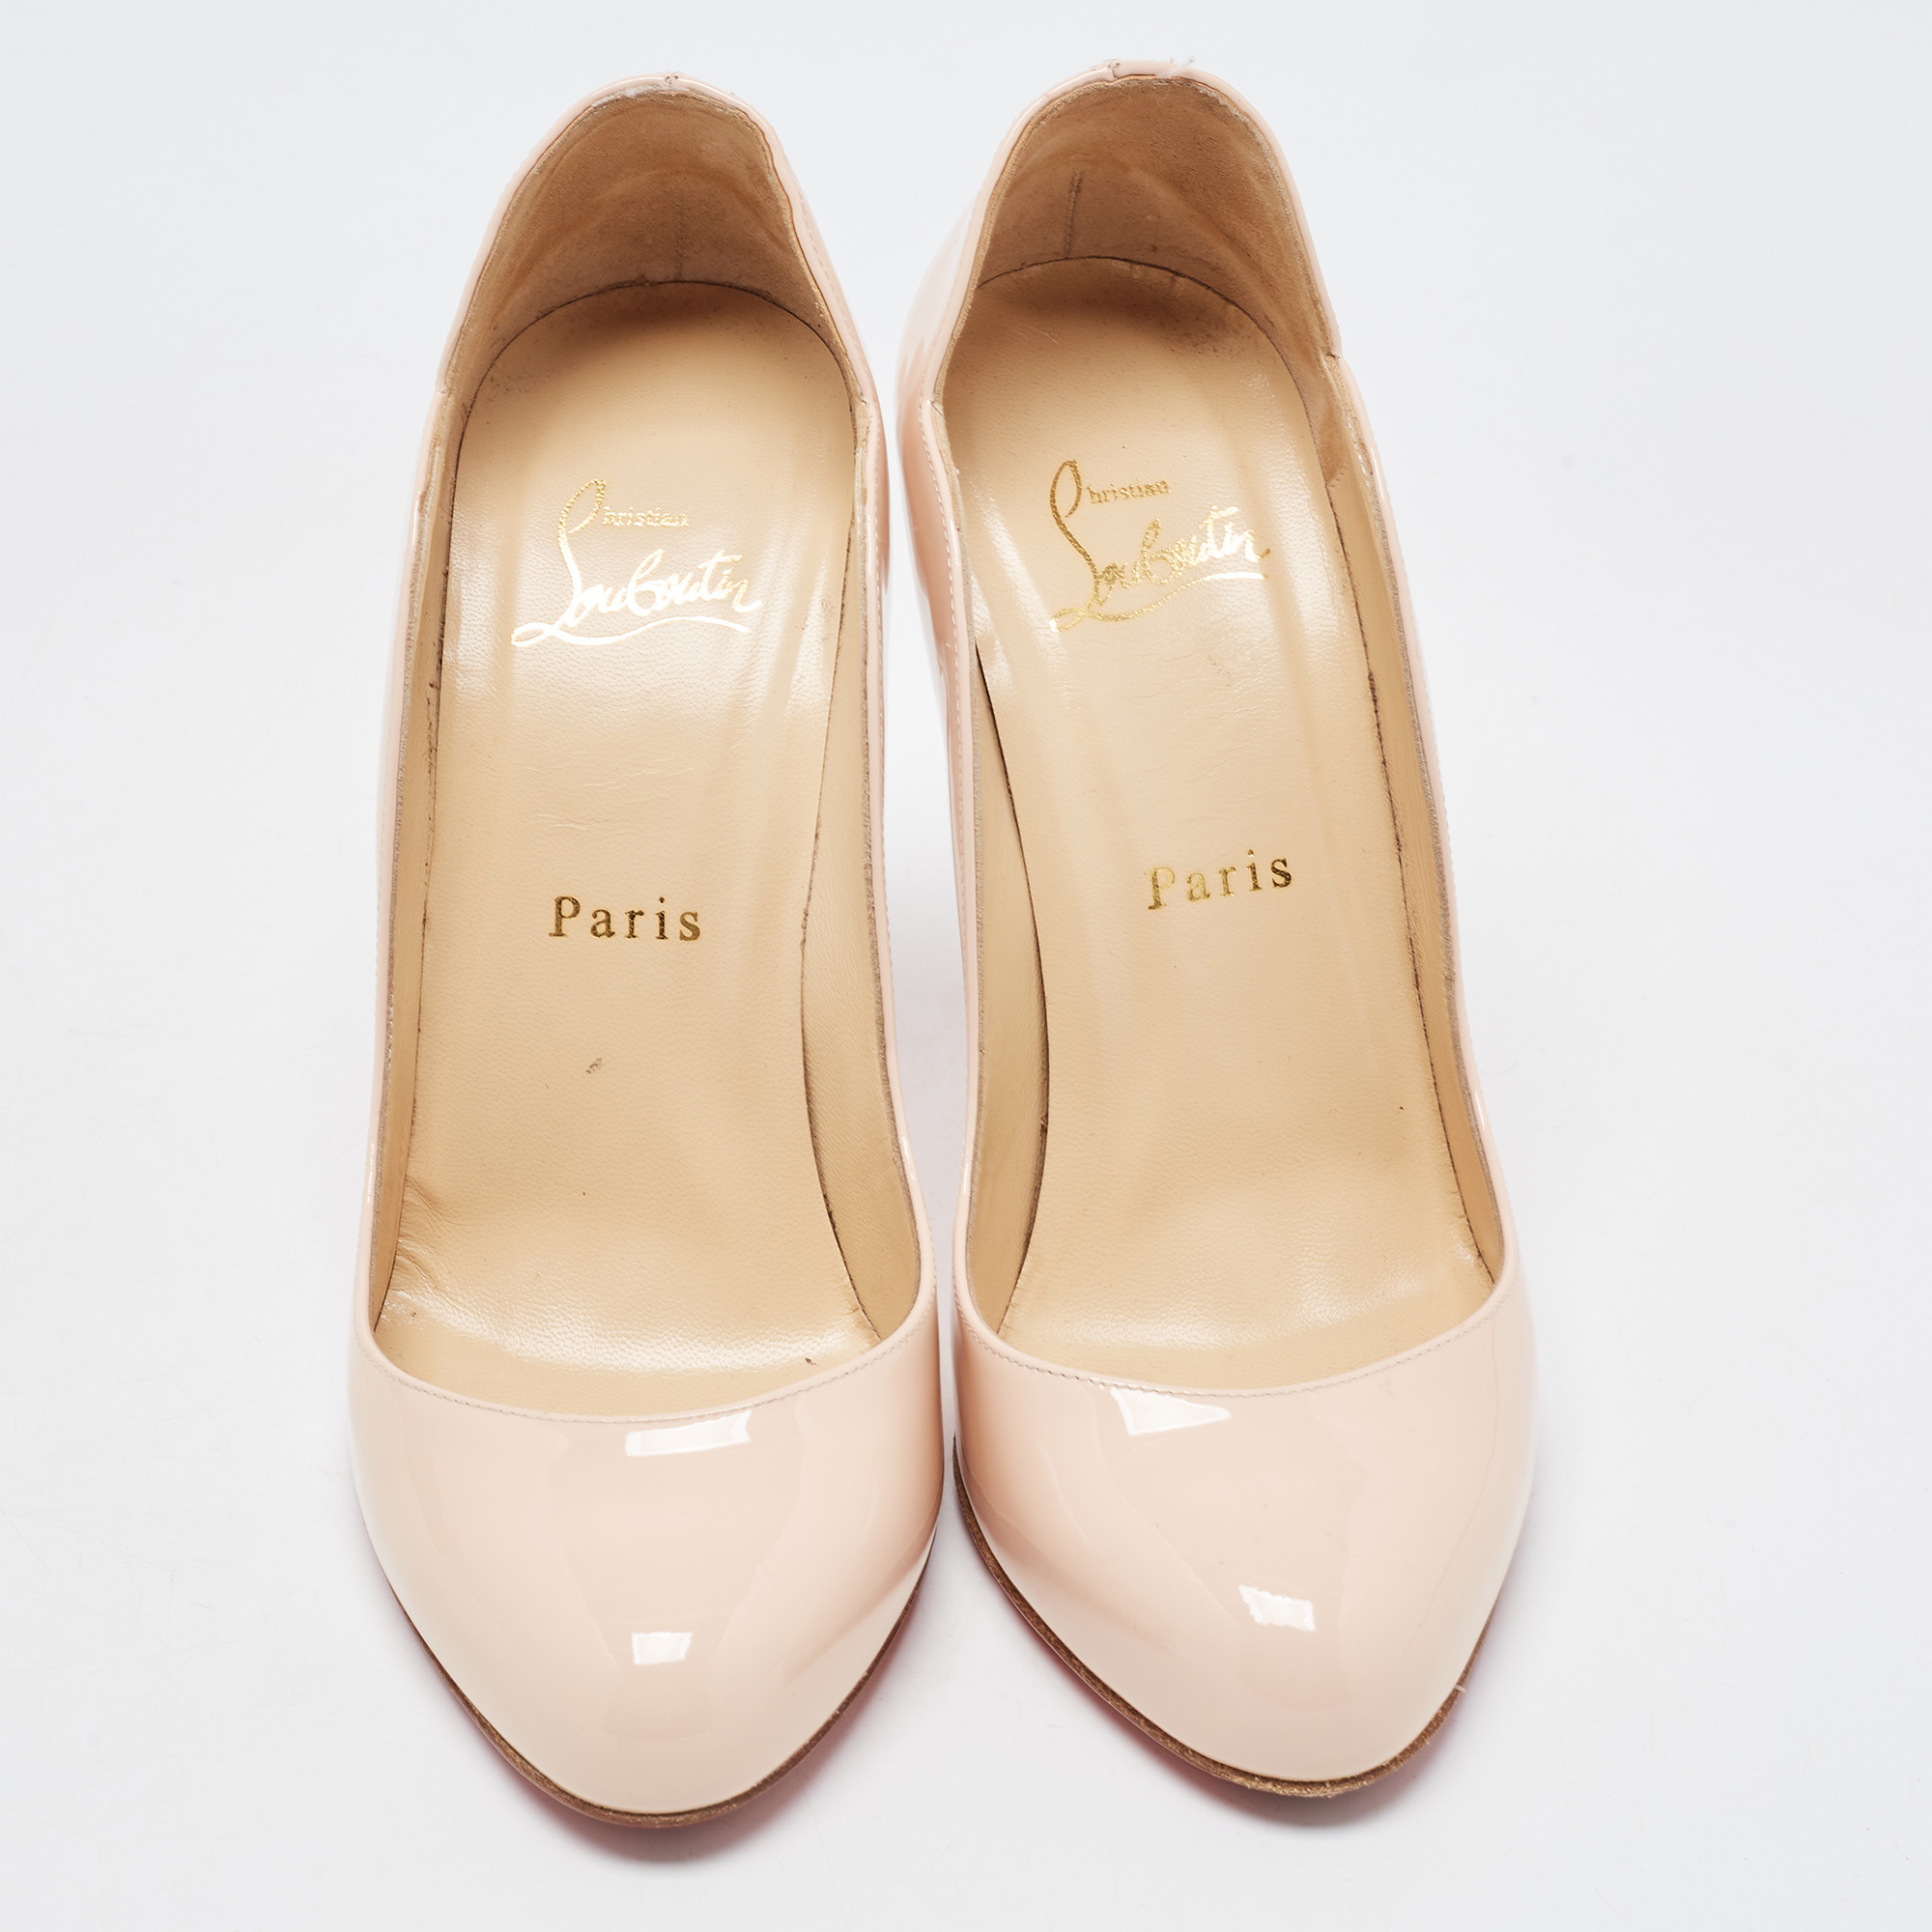 Christian Louboutin Light Pink Patent Leather Wawy Dolly Pumps Size 37.5